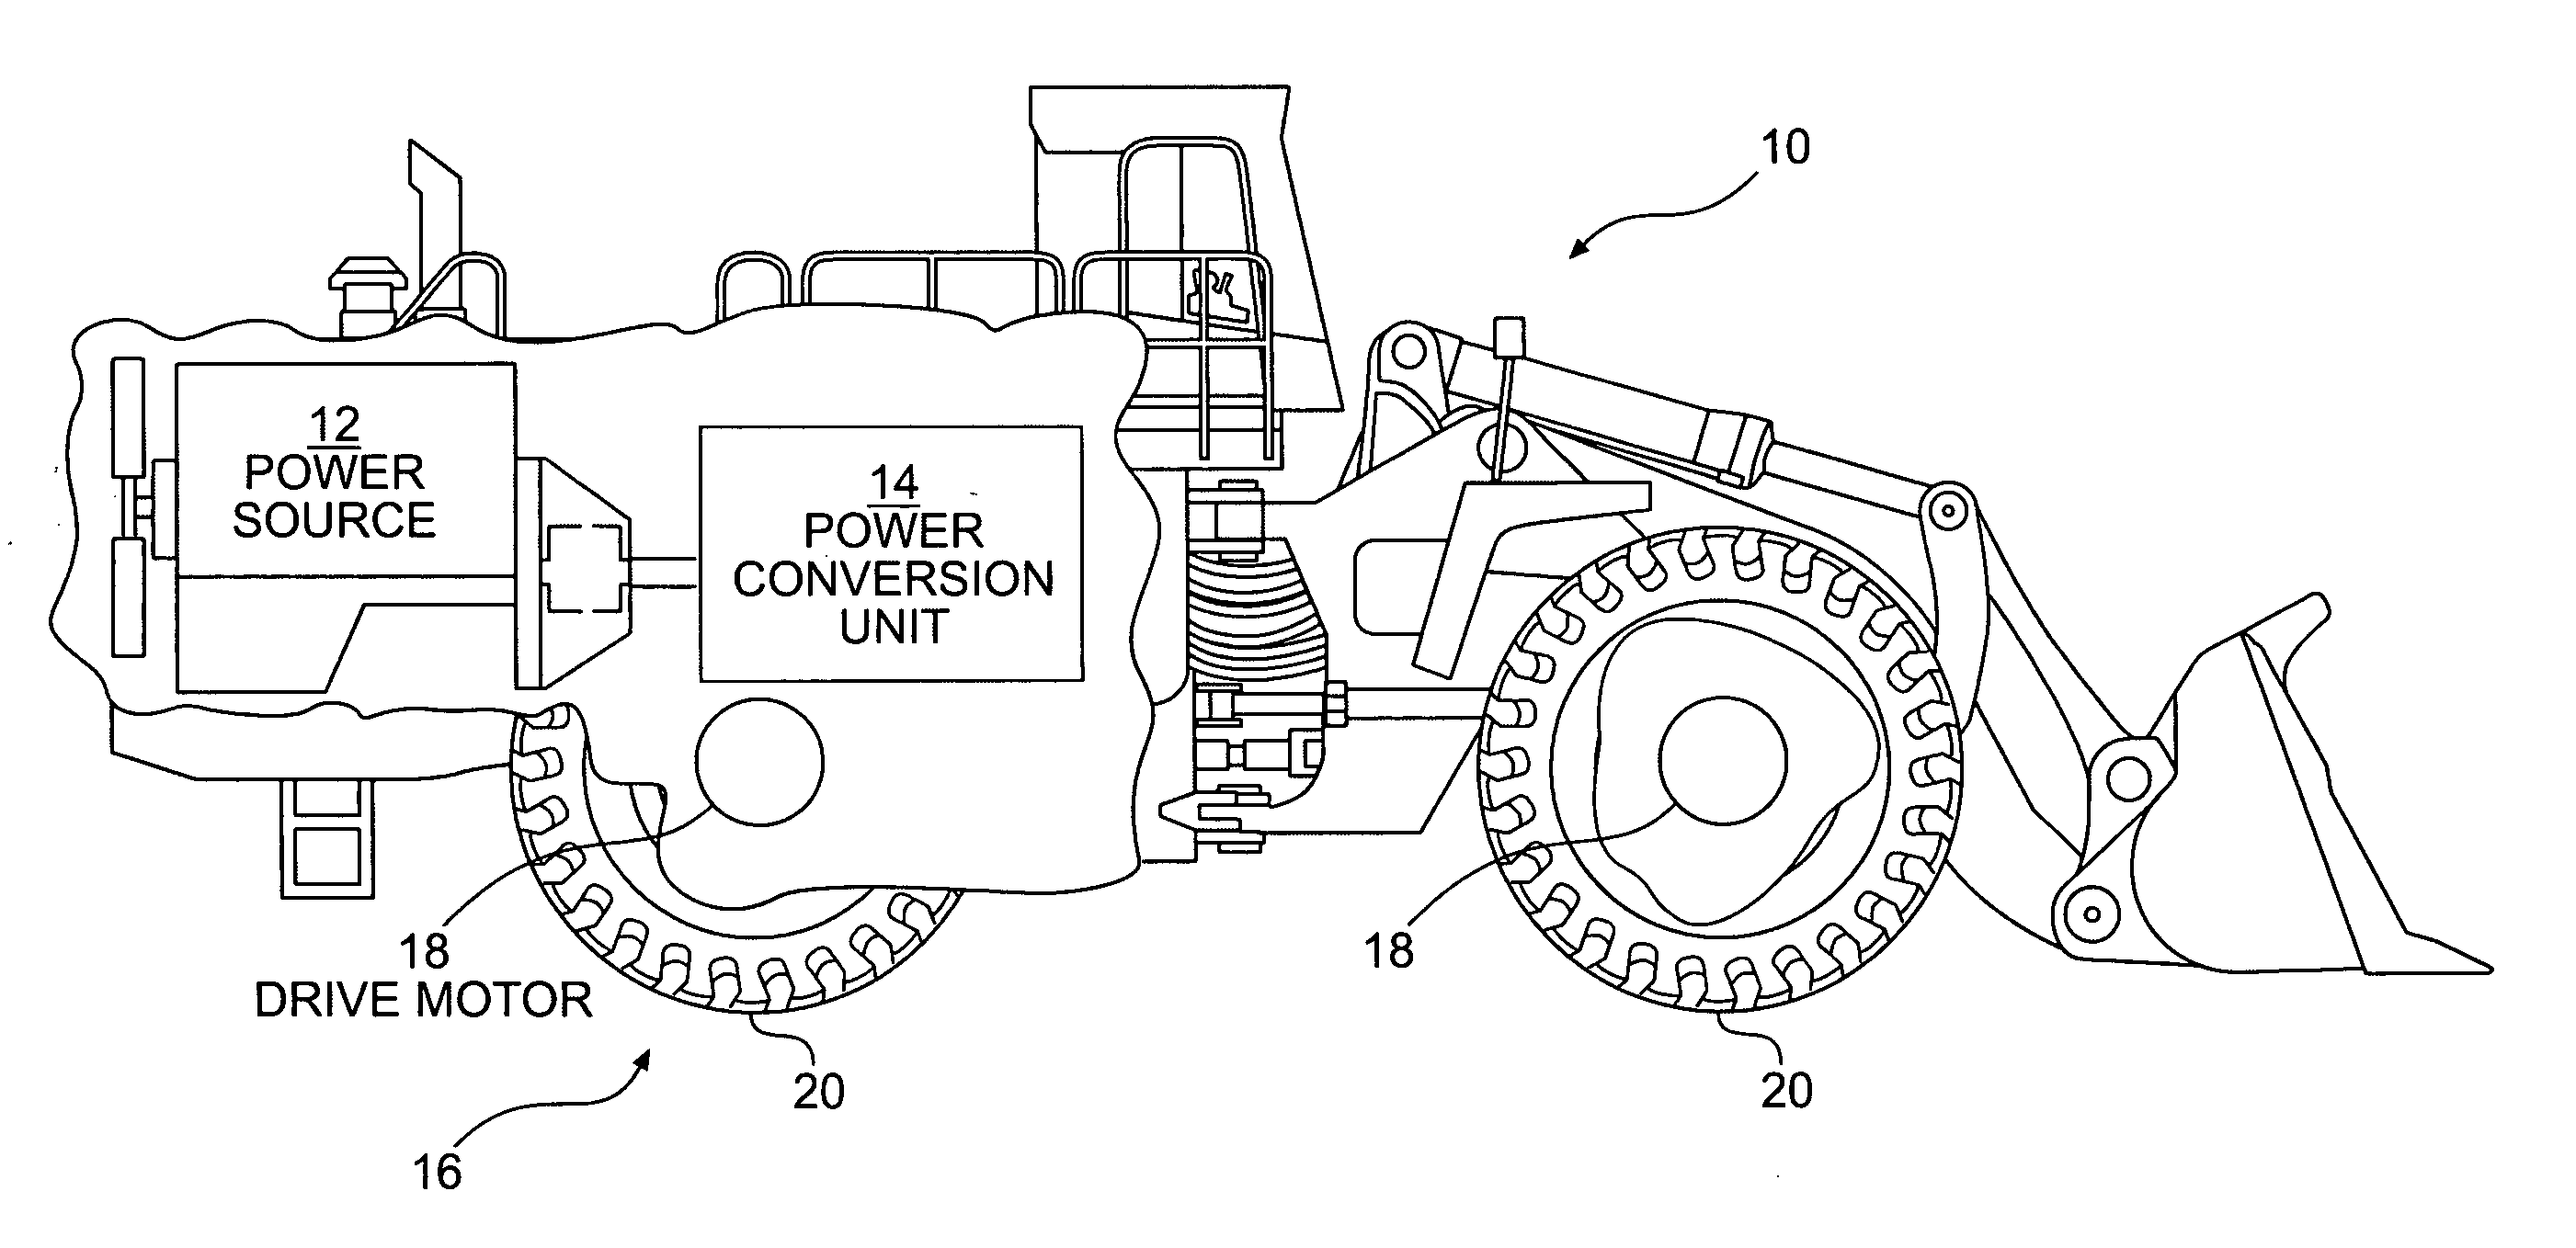 Multi-motor drive system for a work machine